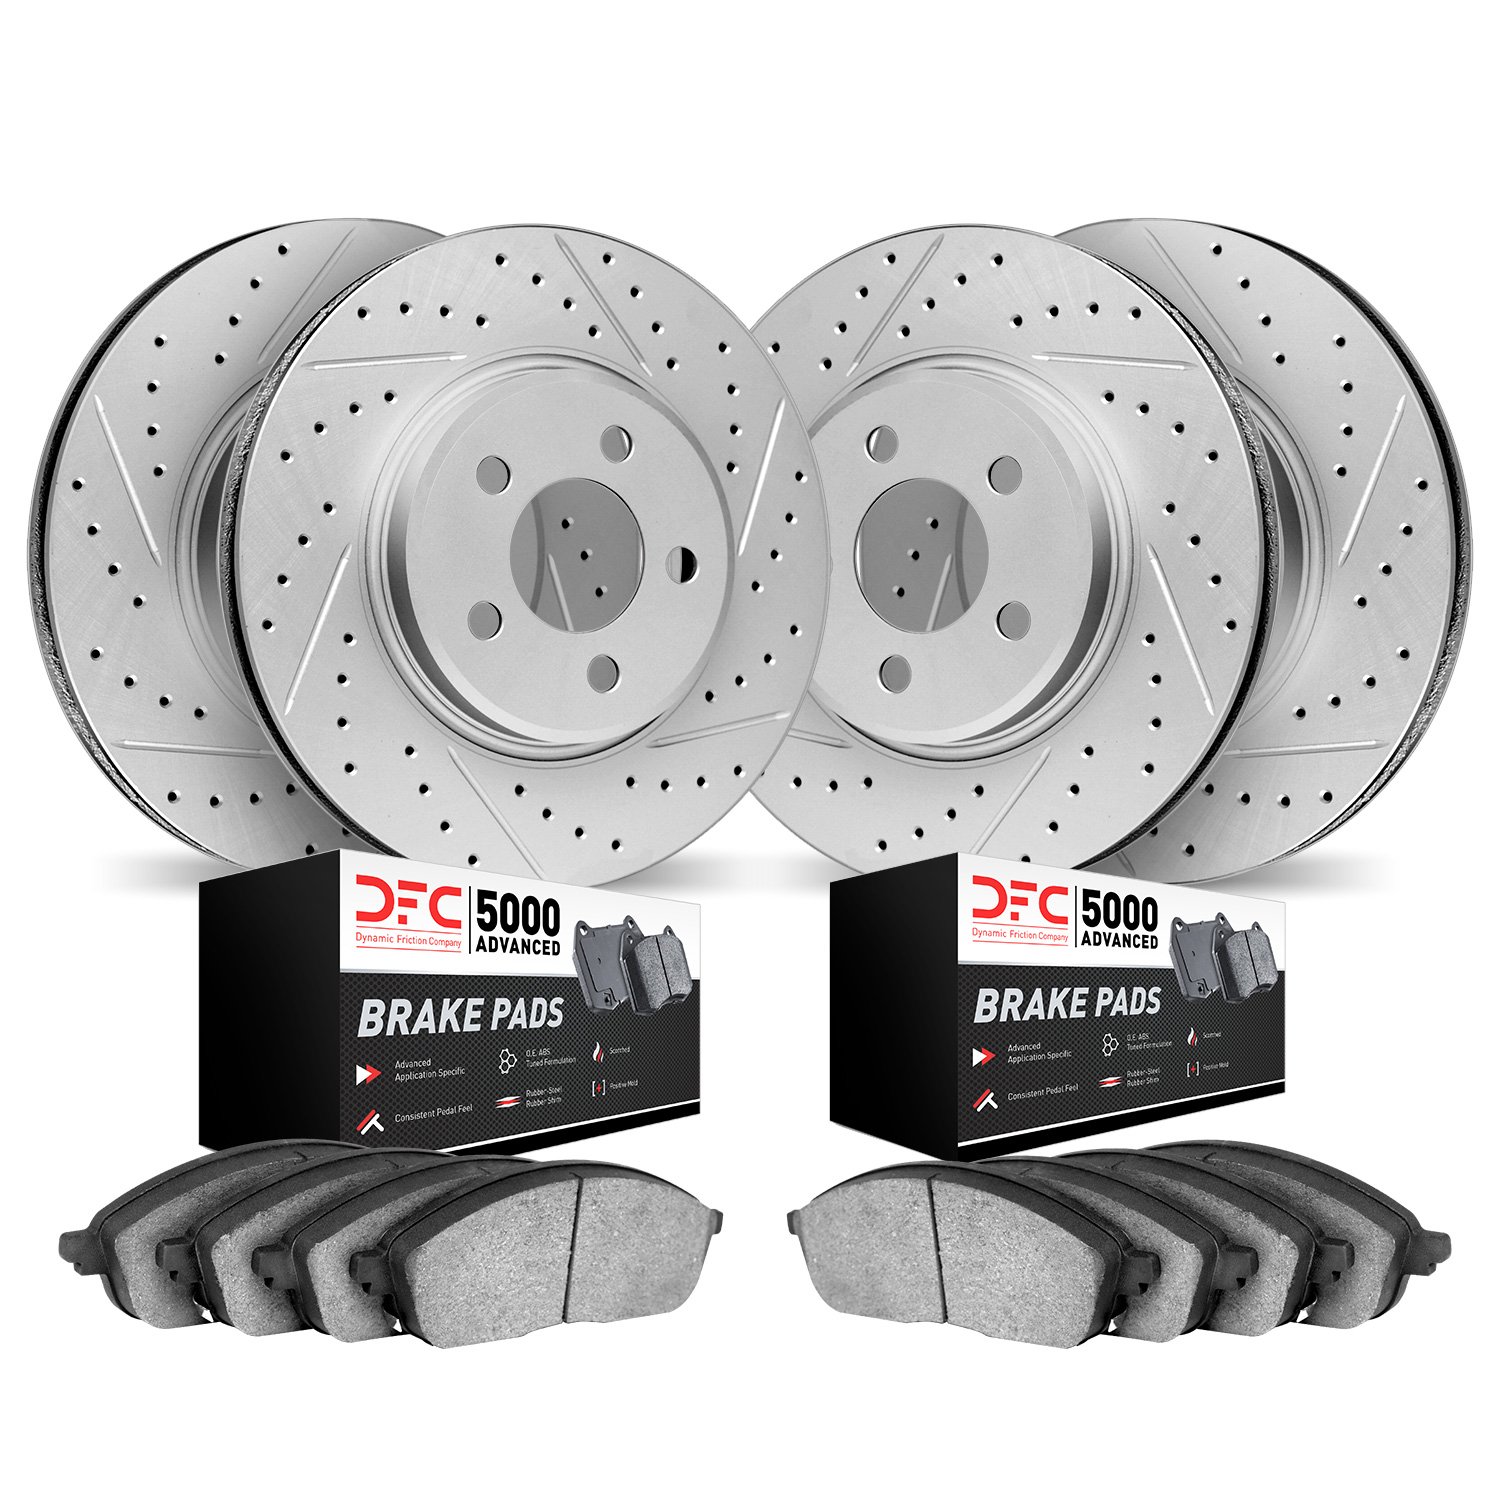 2504-75023 Geoperformance Drilled/Slotted Rotors w/5000 Advanced Brake Pads Kit, 2010-2017 Lexus/Toyota/Scion, Position: Front a